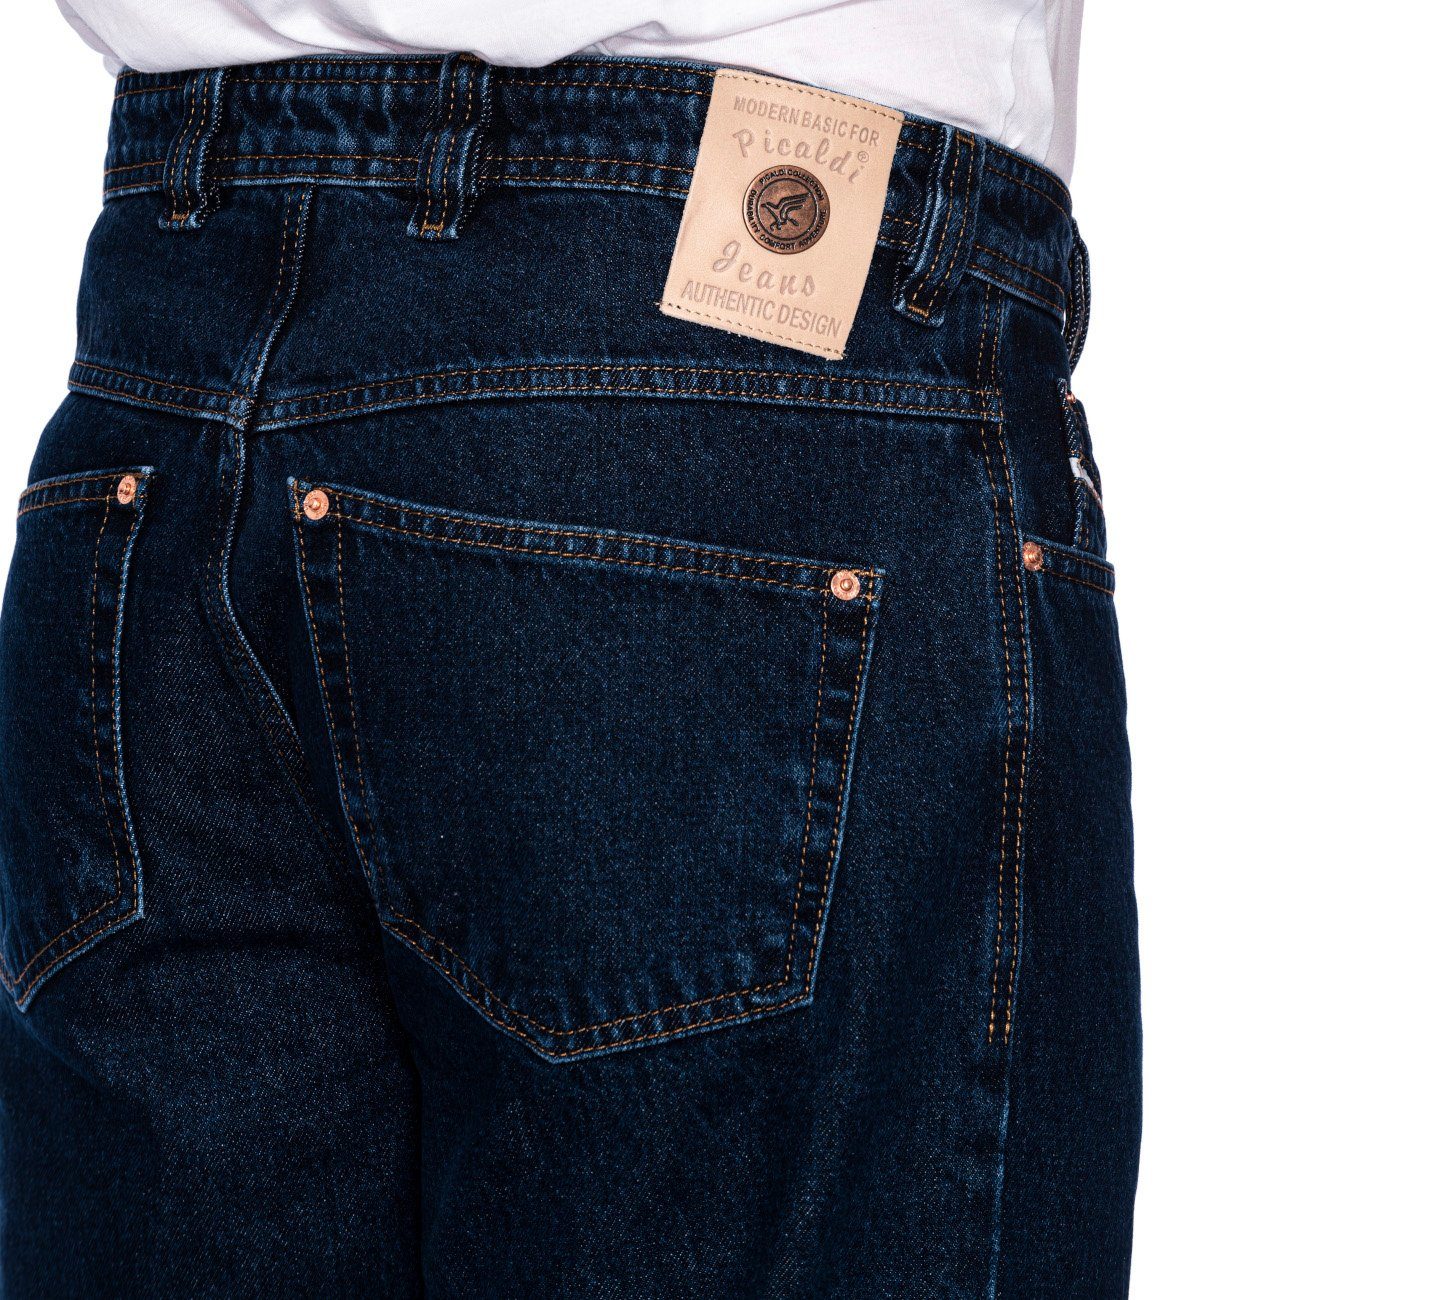 PICALDI Jeans Weite Zicco Fit 472 Relaxed Loose Jeans El Patron Fit